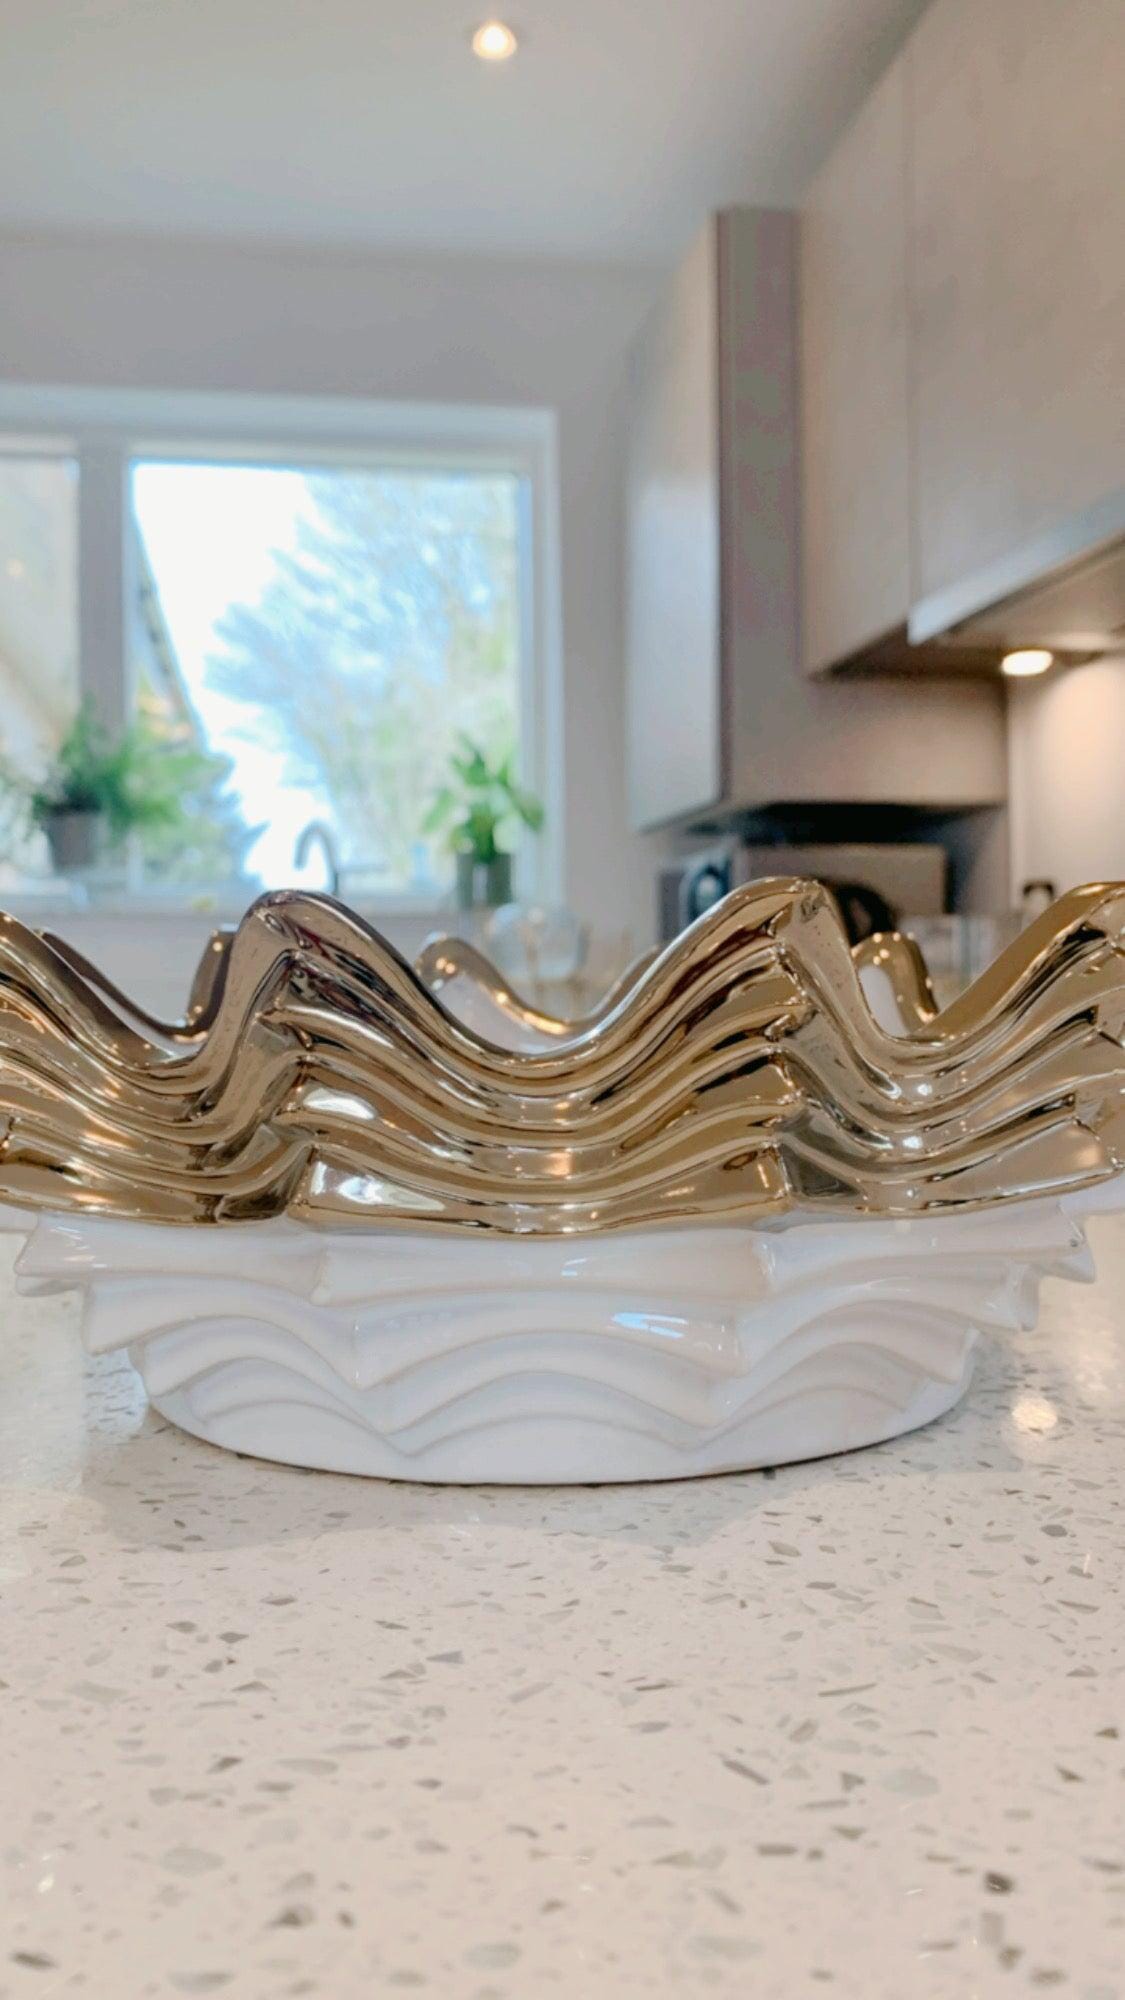 10"D White and Gold Scalloped Bowl Decorative Bowls High Class Touch - Home Decor 